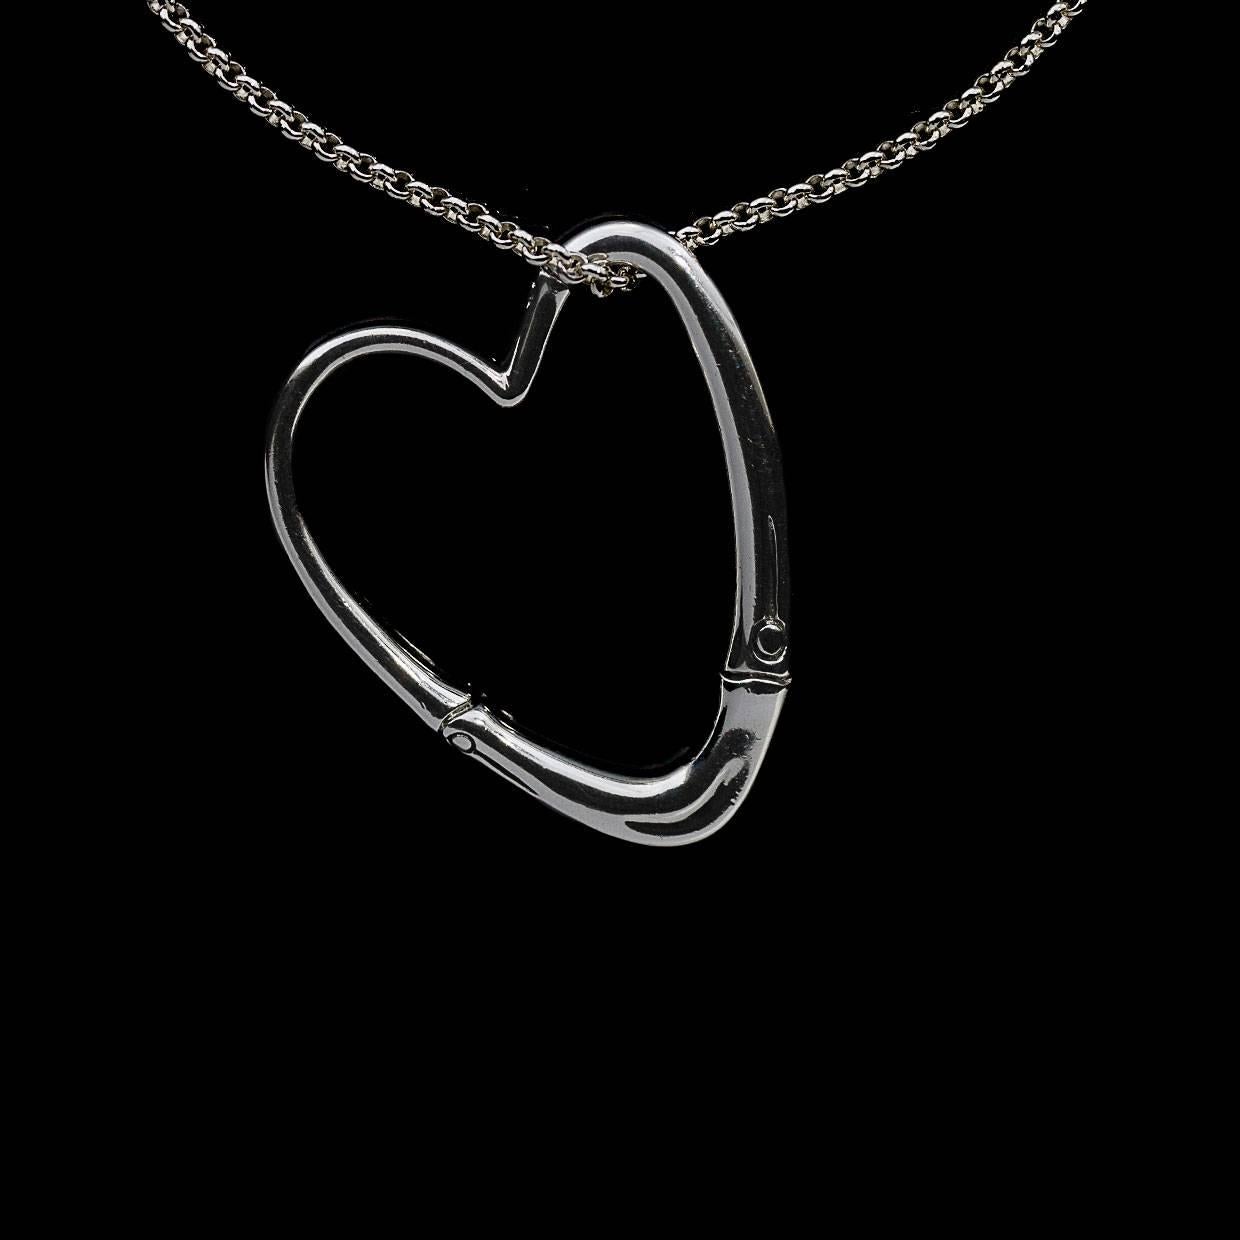 Each piece of John Hardy jewelry has been crafted in Bali since 1975. John Hardy is dedicated to creating timeless one-of-a-kind pieces that are brilliantly alive.

This sterling silver Heart pendant necklace is from John Hardy's Bamboo collection.